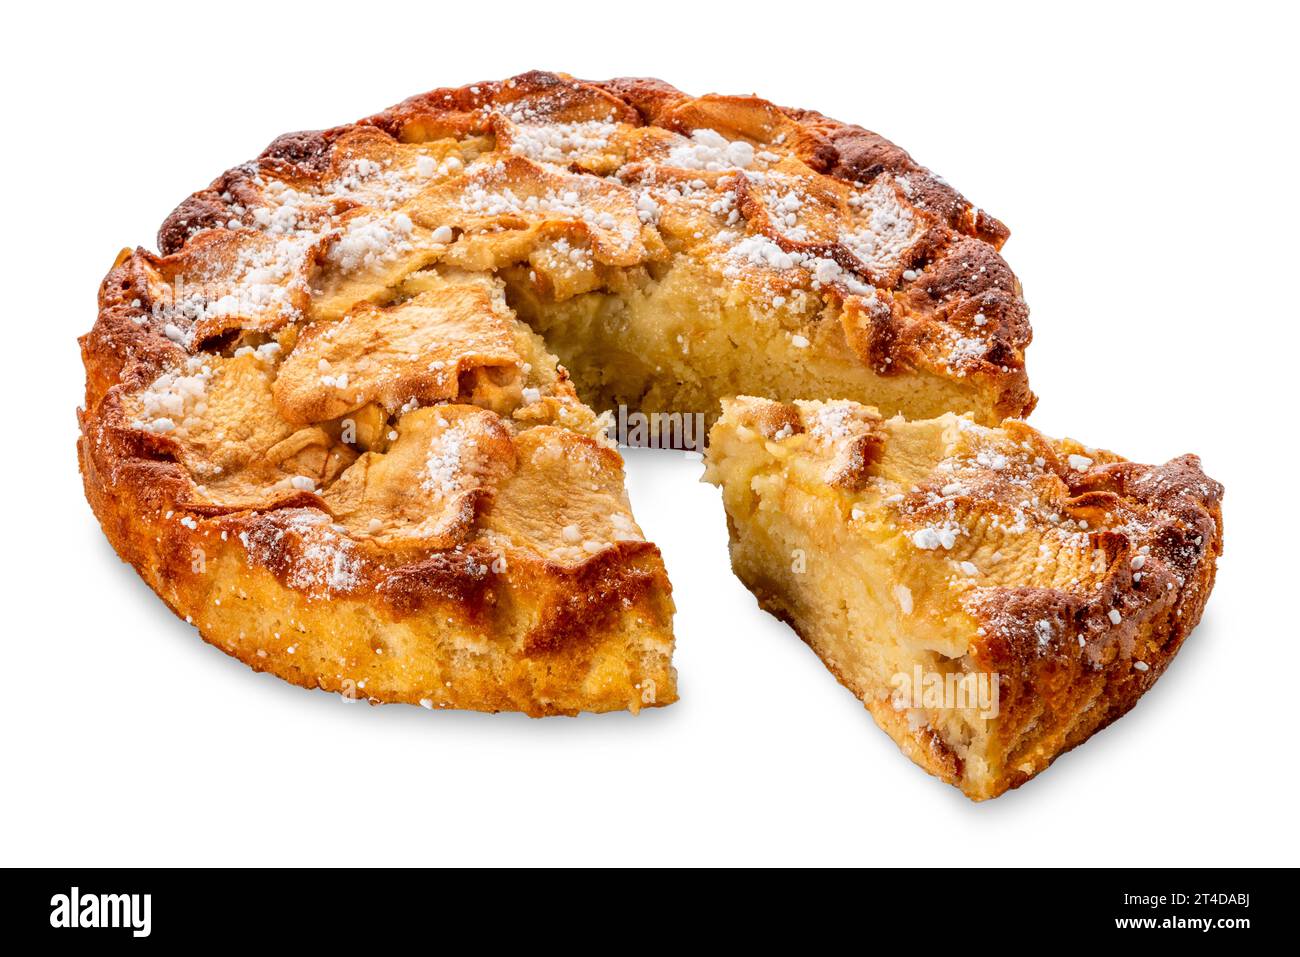 Homemade apple pie cut with slice isolated on white with clipping path included Stock Photo